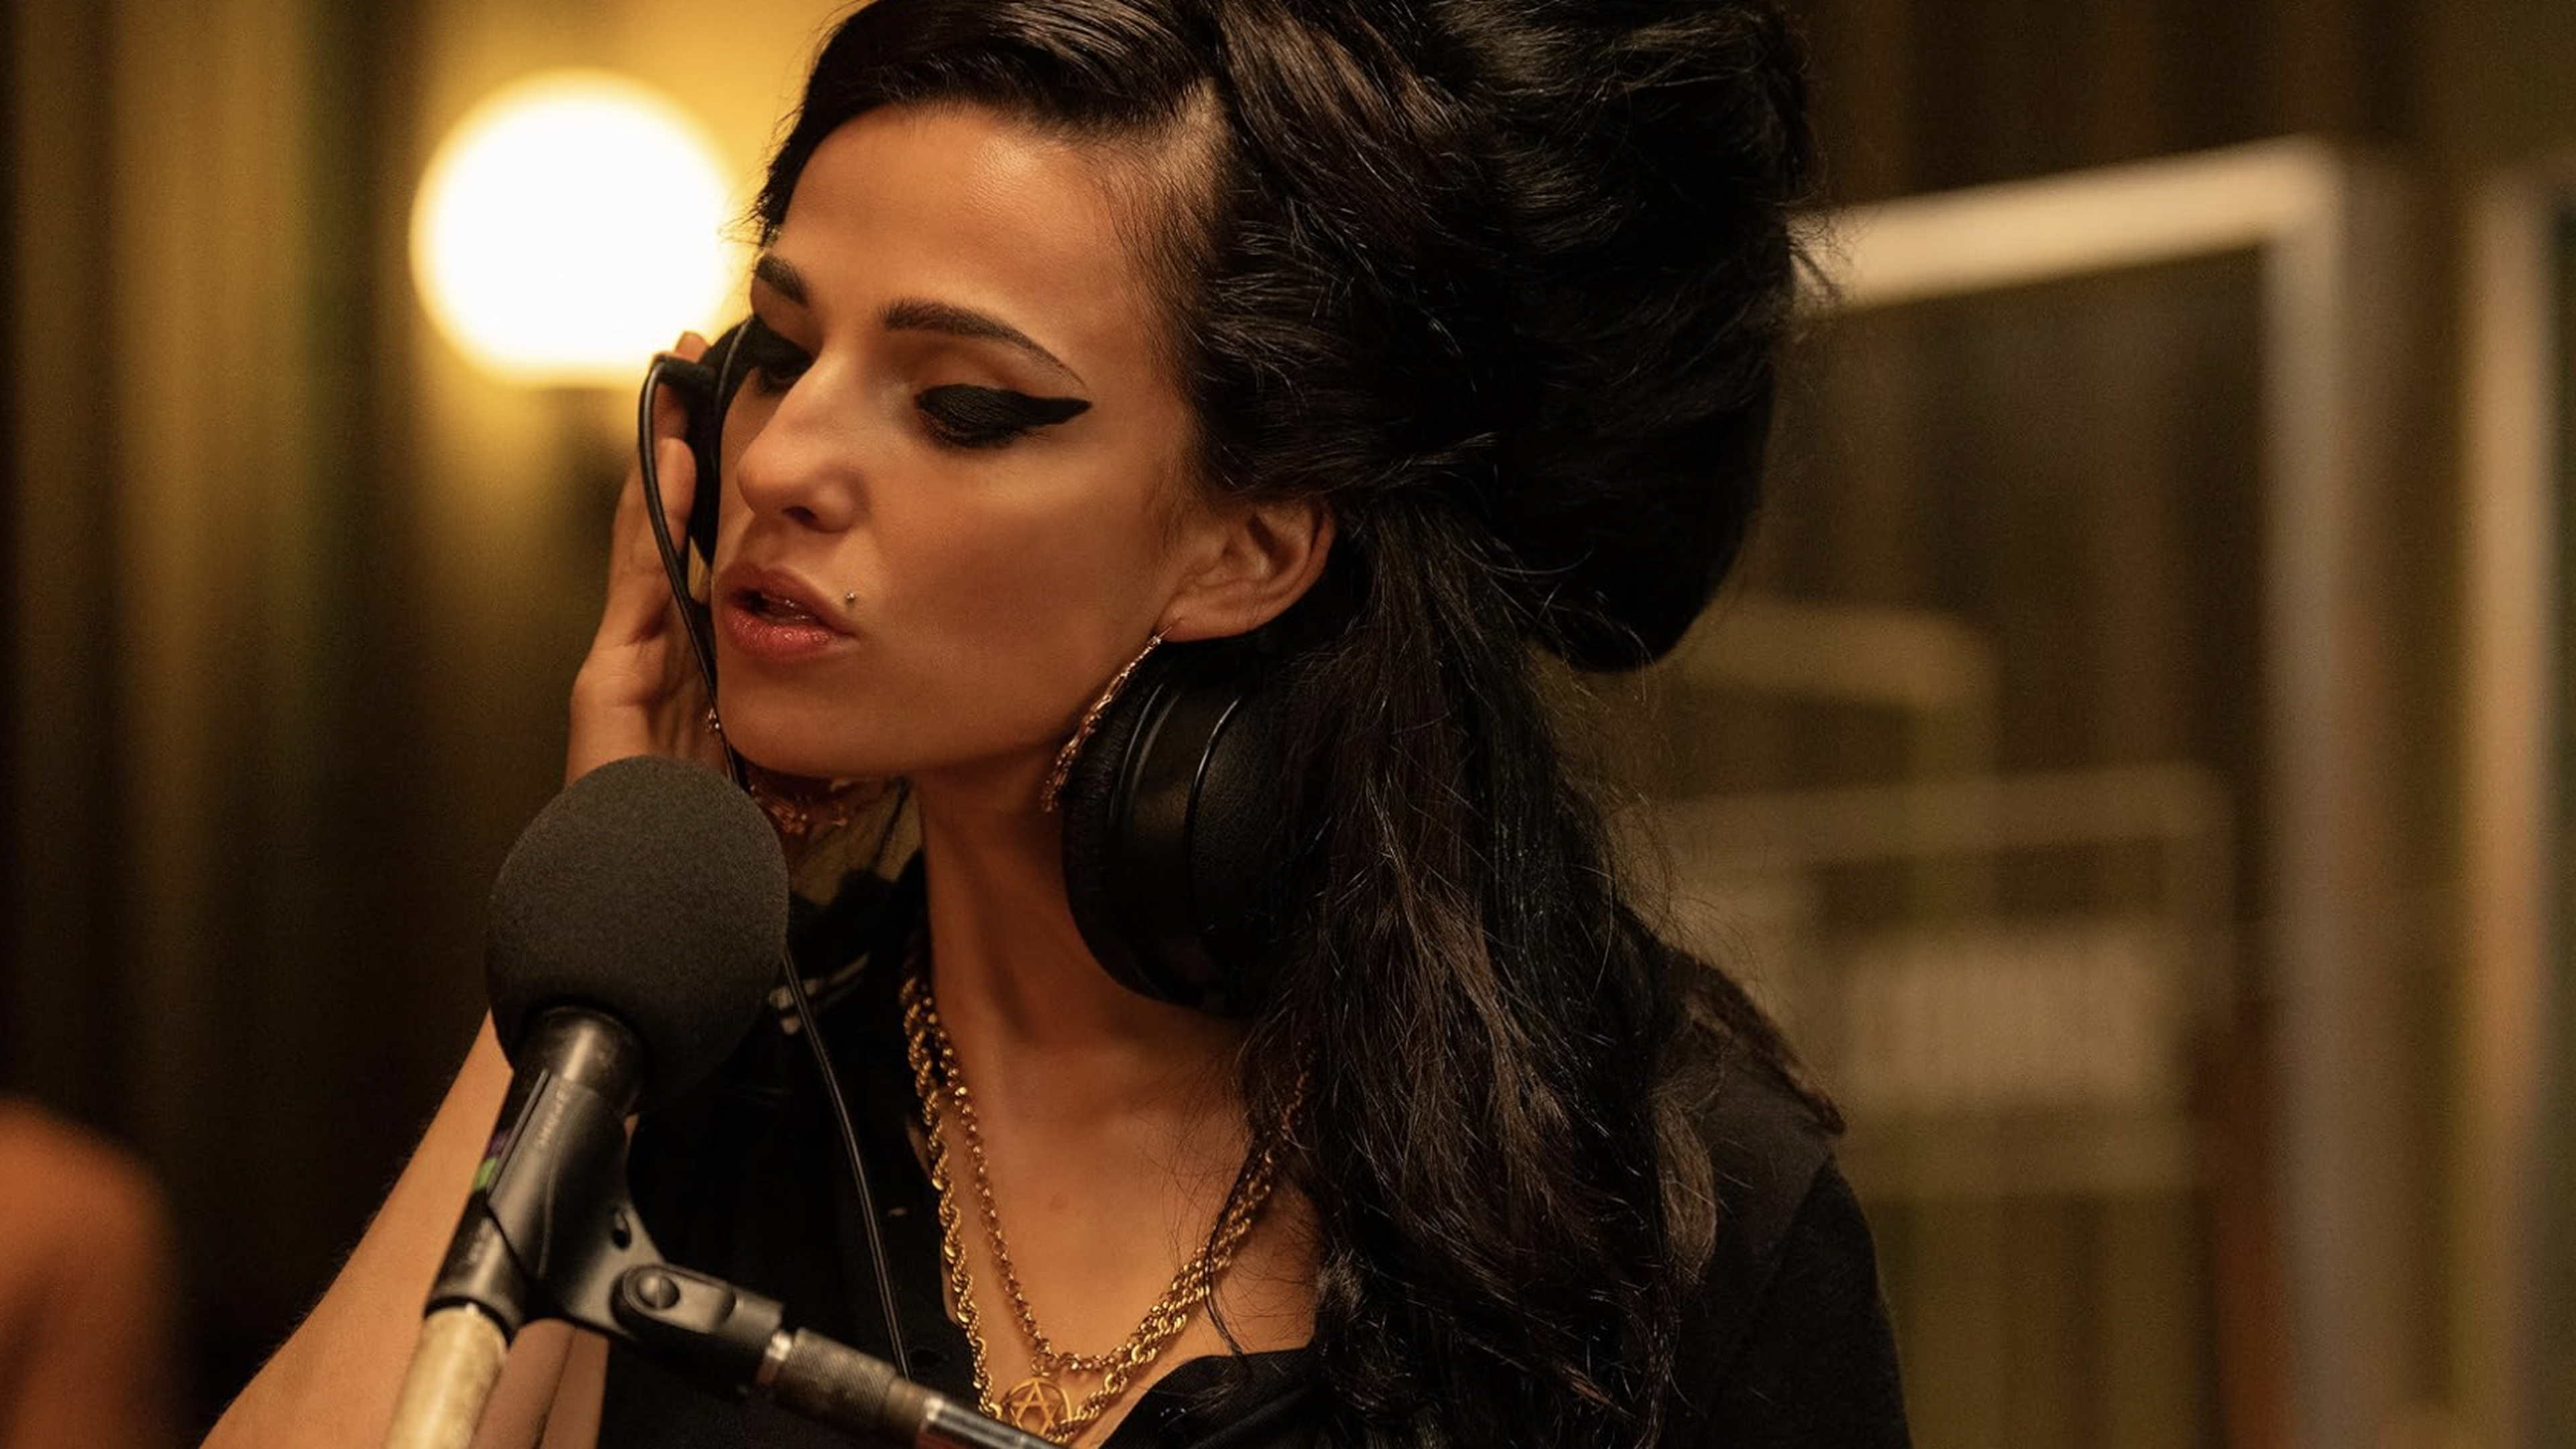 Marisa Abela as Amy Winehouse, complete with signature catwing eyeliner and beehive hairdo in Sam Taylor-Johnson’s ‘Back to Black’